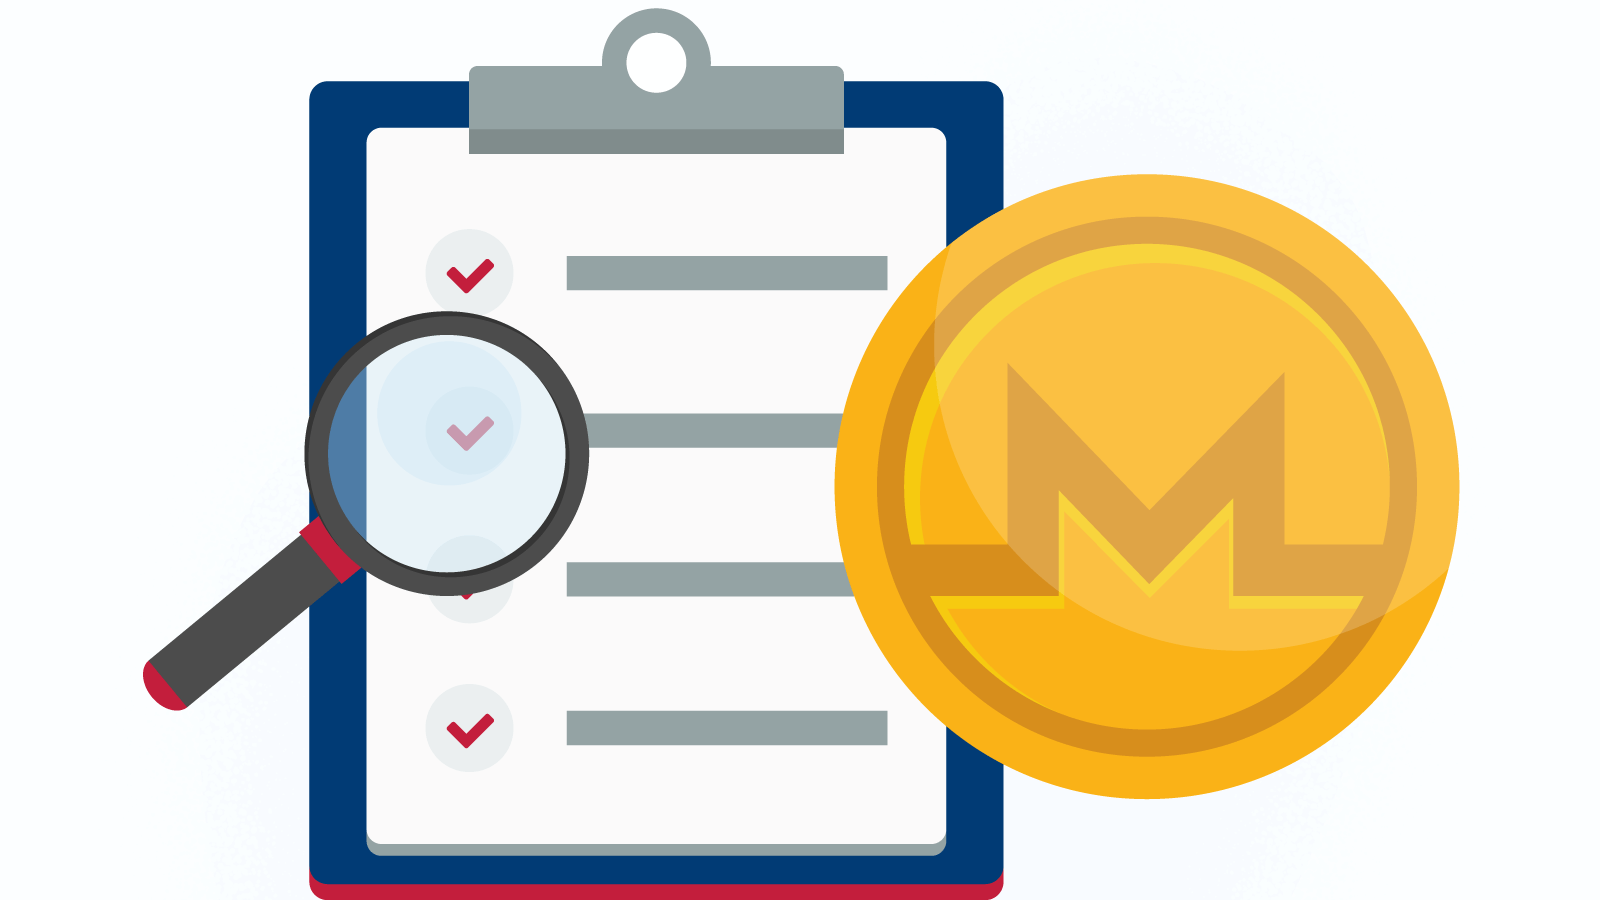 How to Choose Your Monero Casino Like an Expert